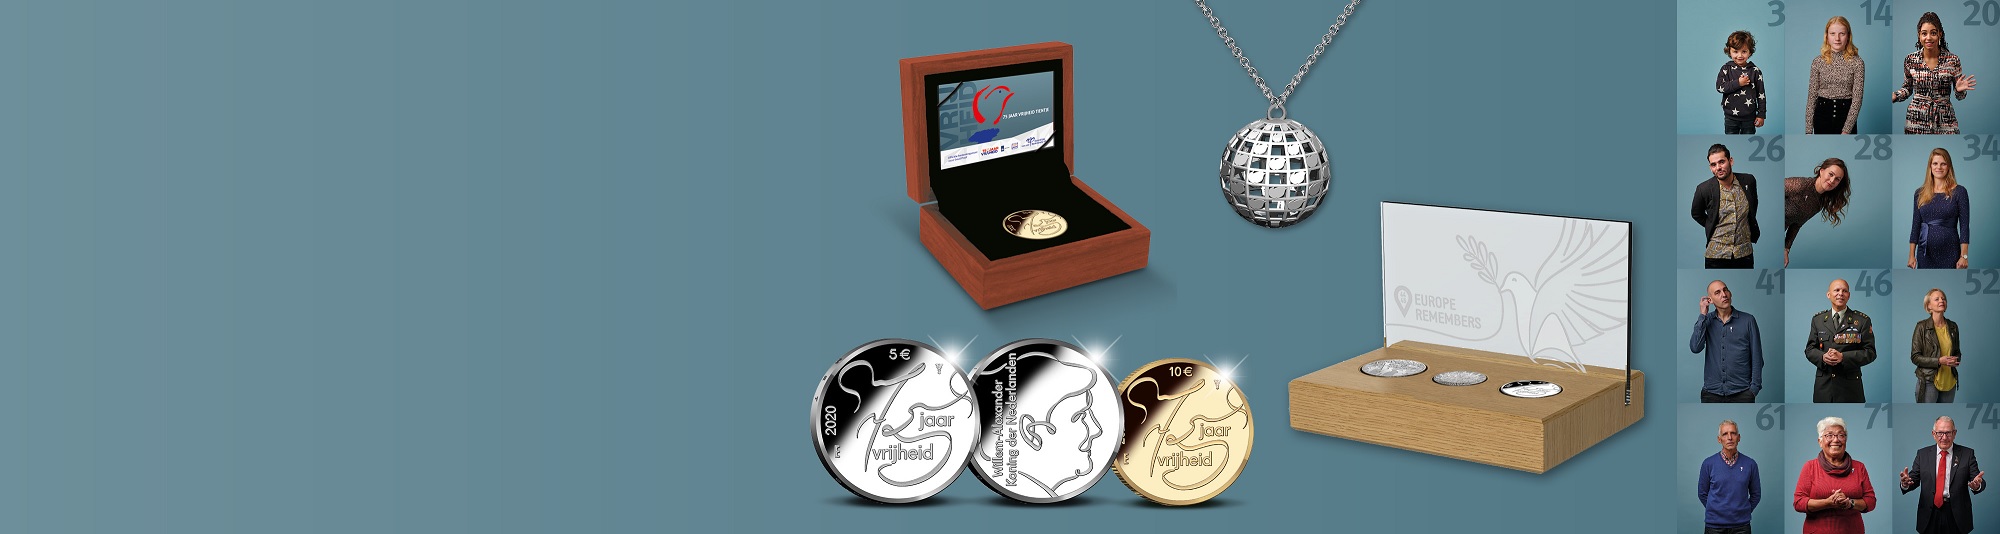 Royal Dutch Mint 75 years of peace and freedom 2020 (shop illustration) (zoom)